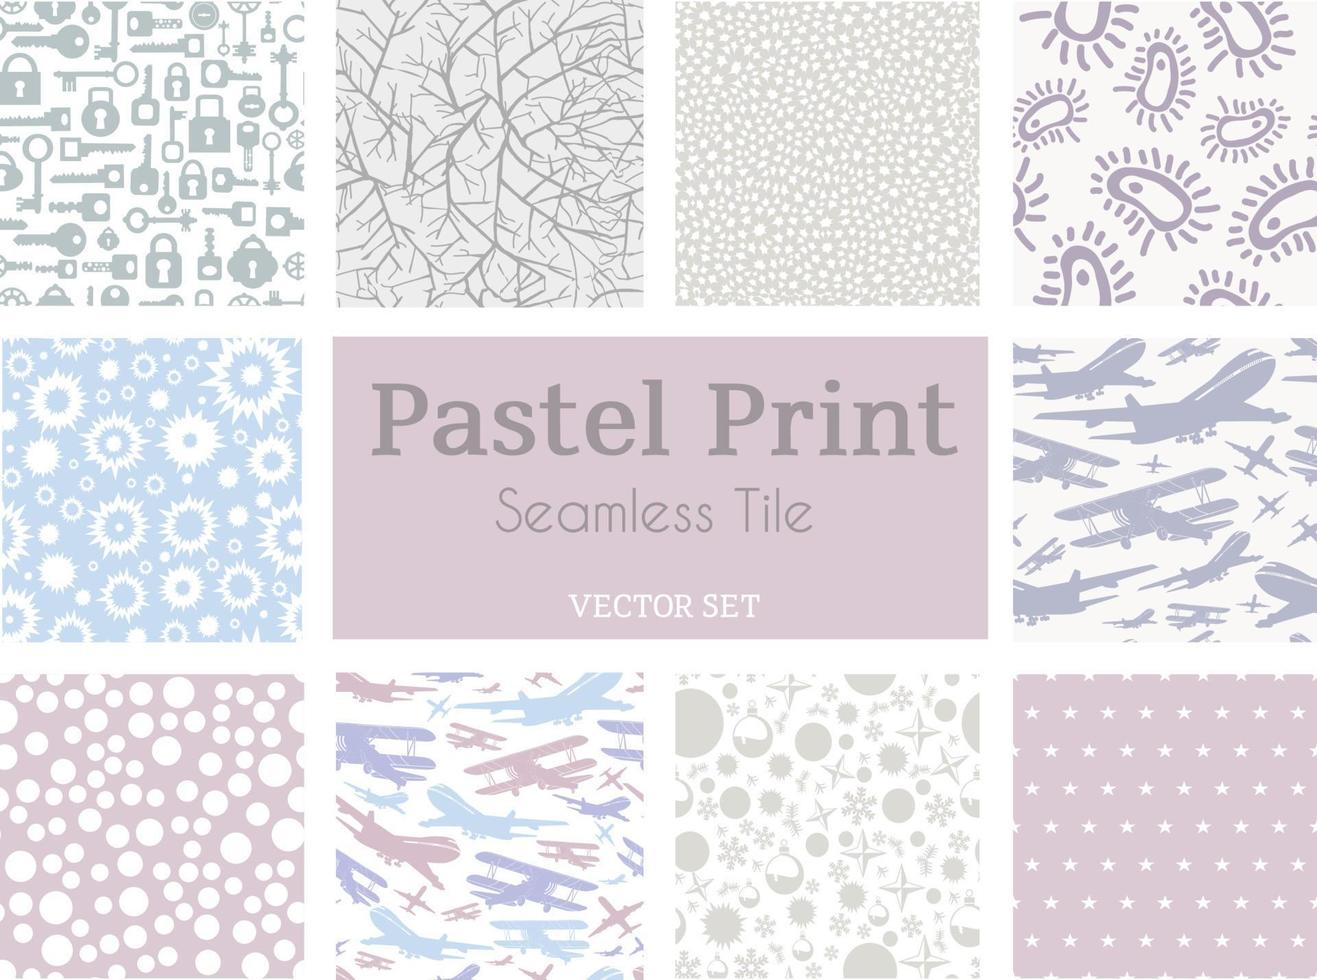 Silhouette of a floral pattern tile pastel cut file vector seamless set